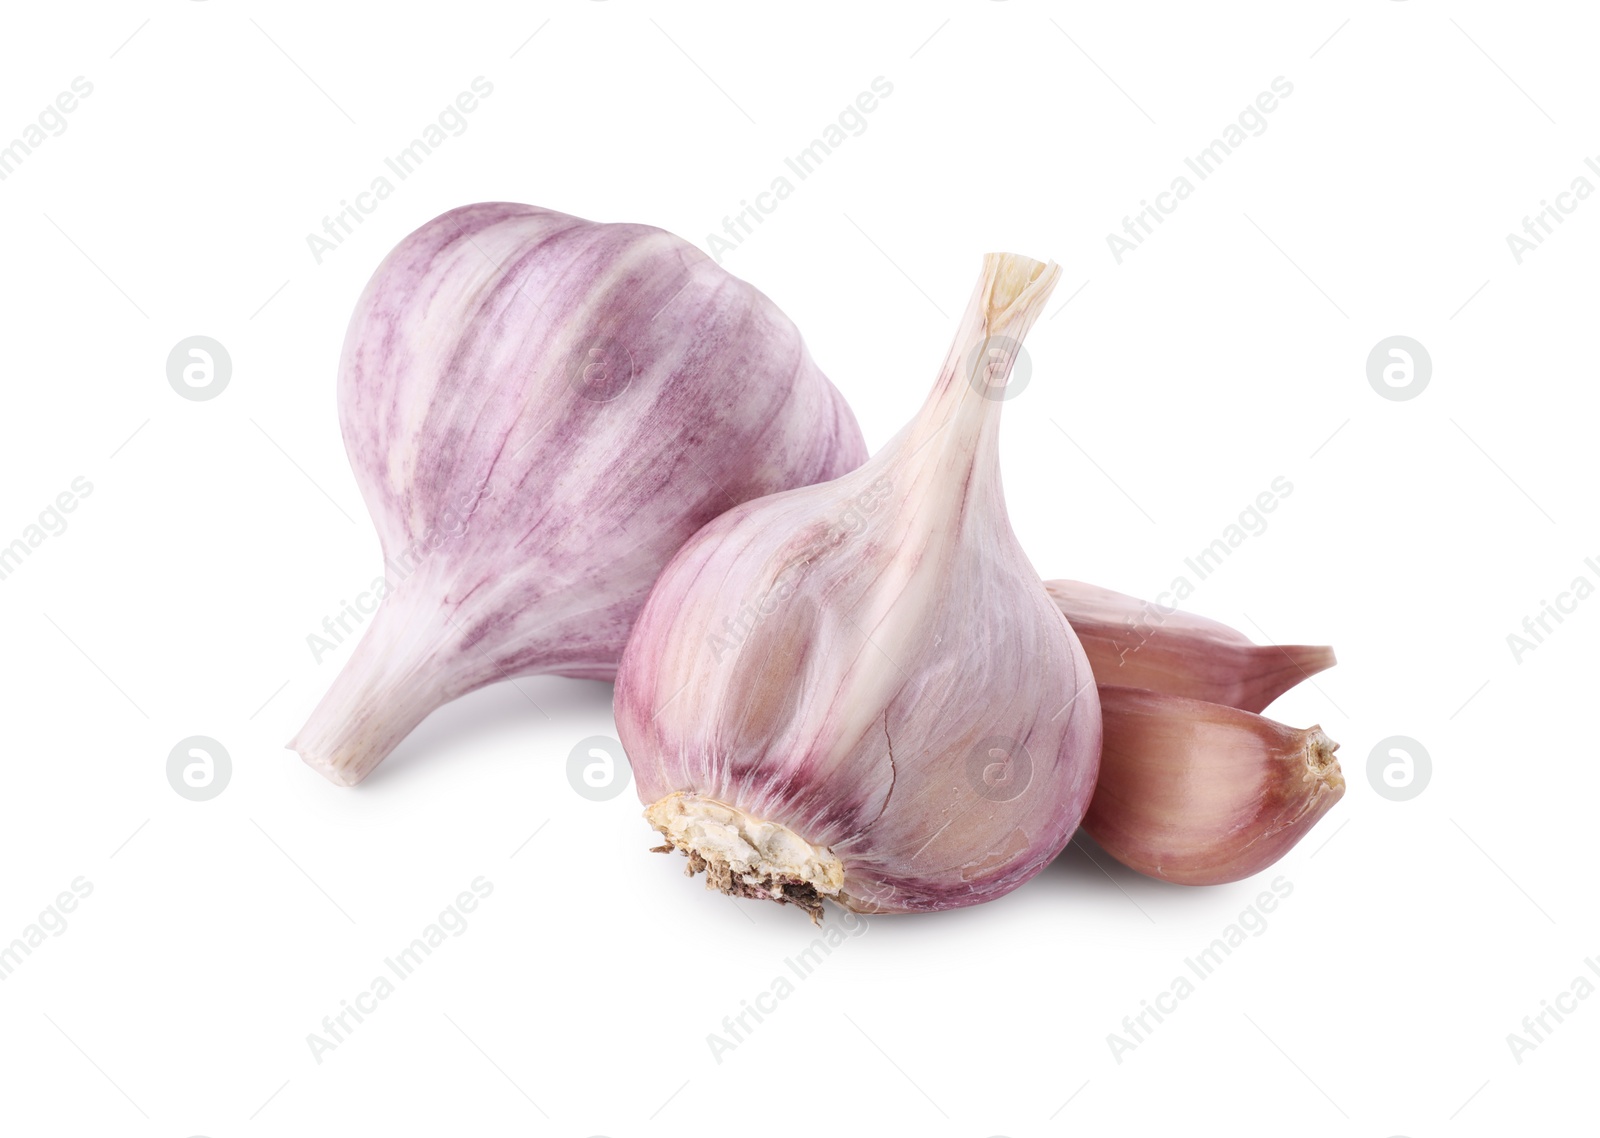 Photo of Fresh raw garlic heads and cloves isolated on white